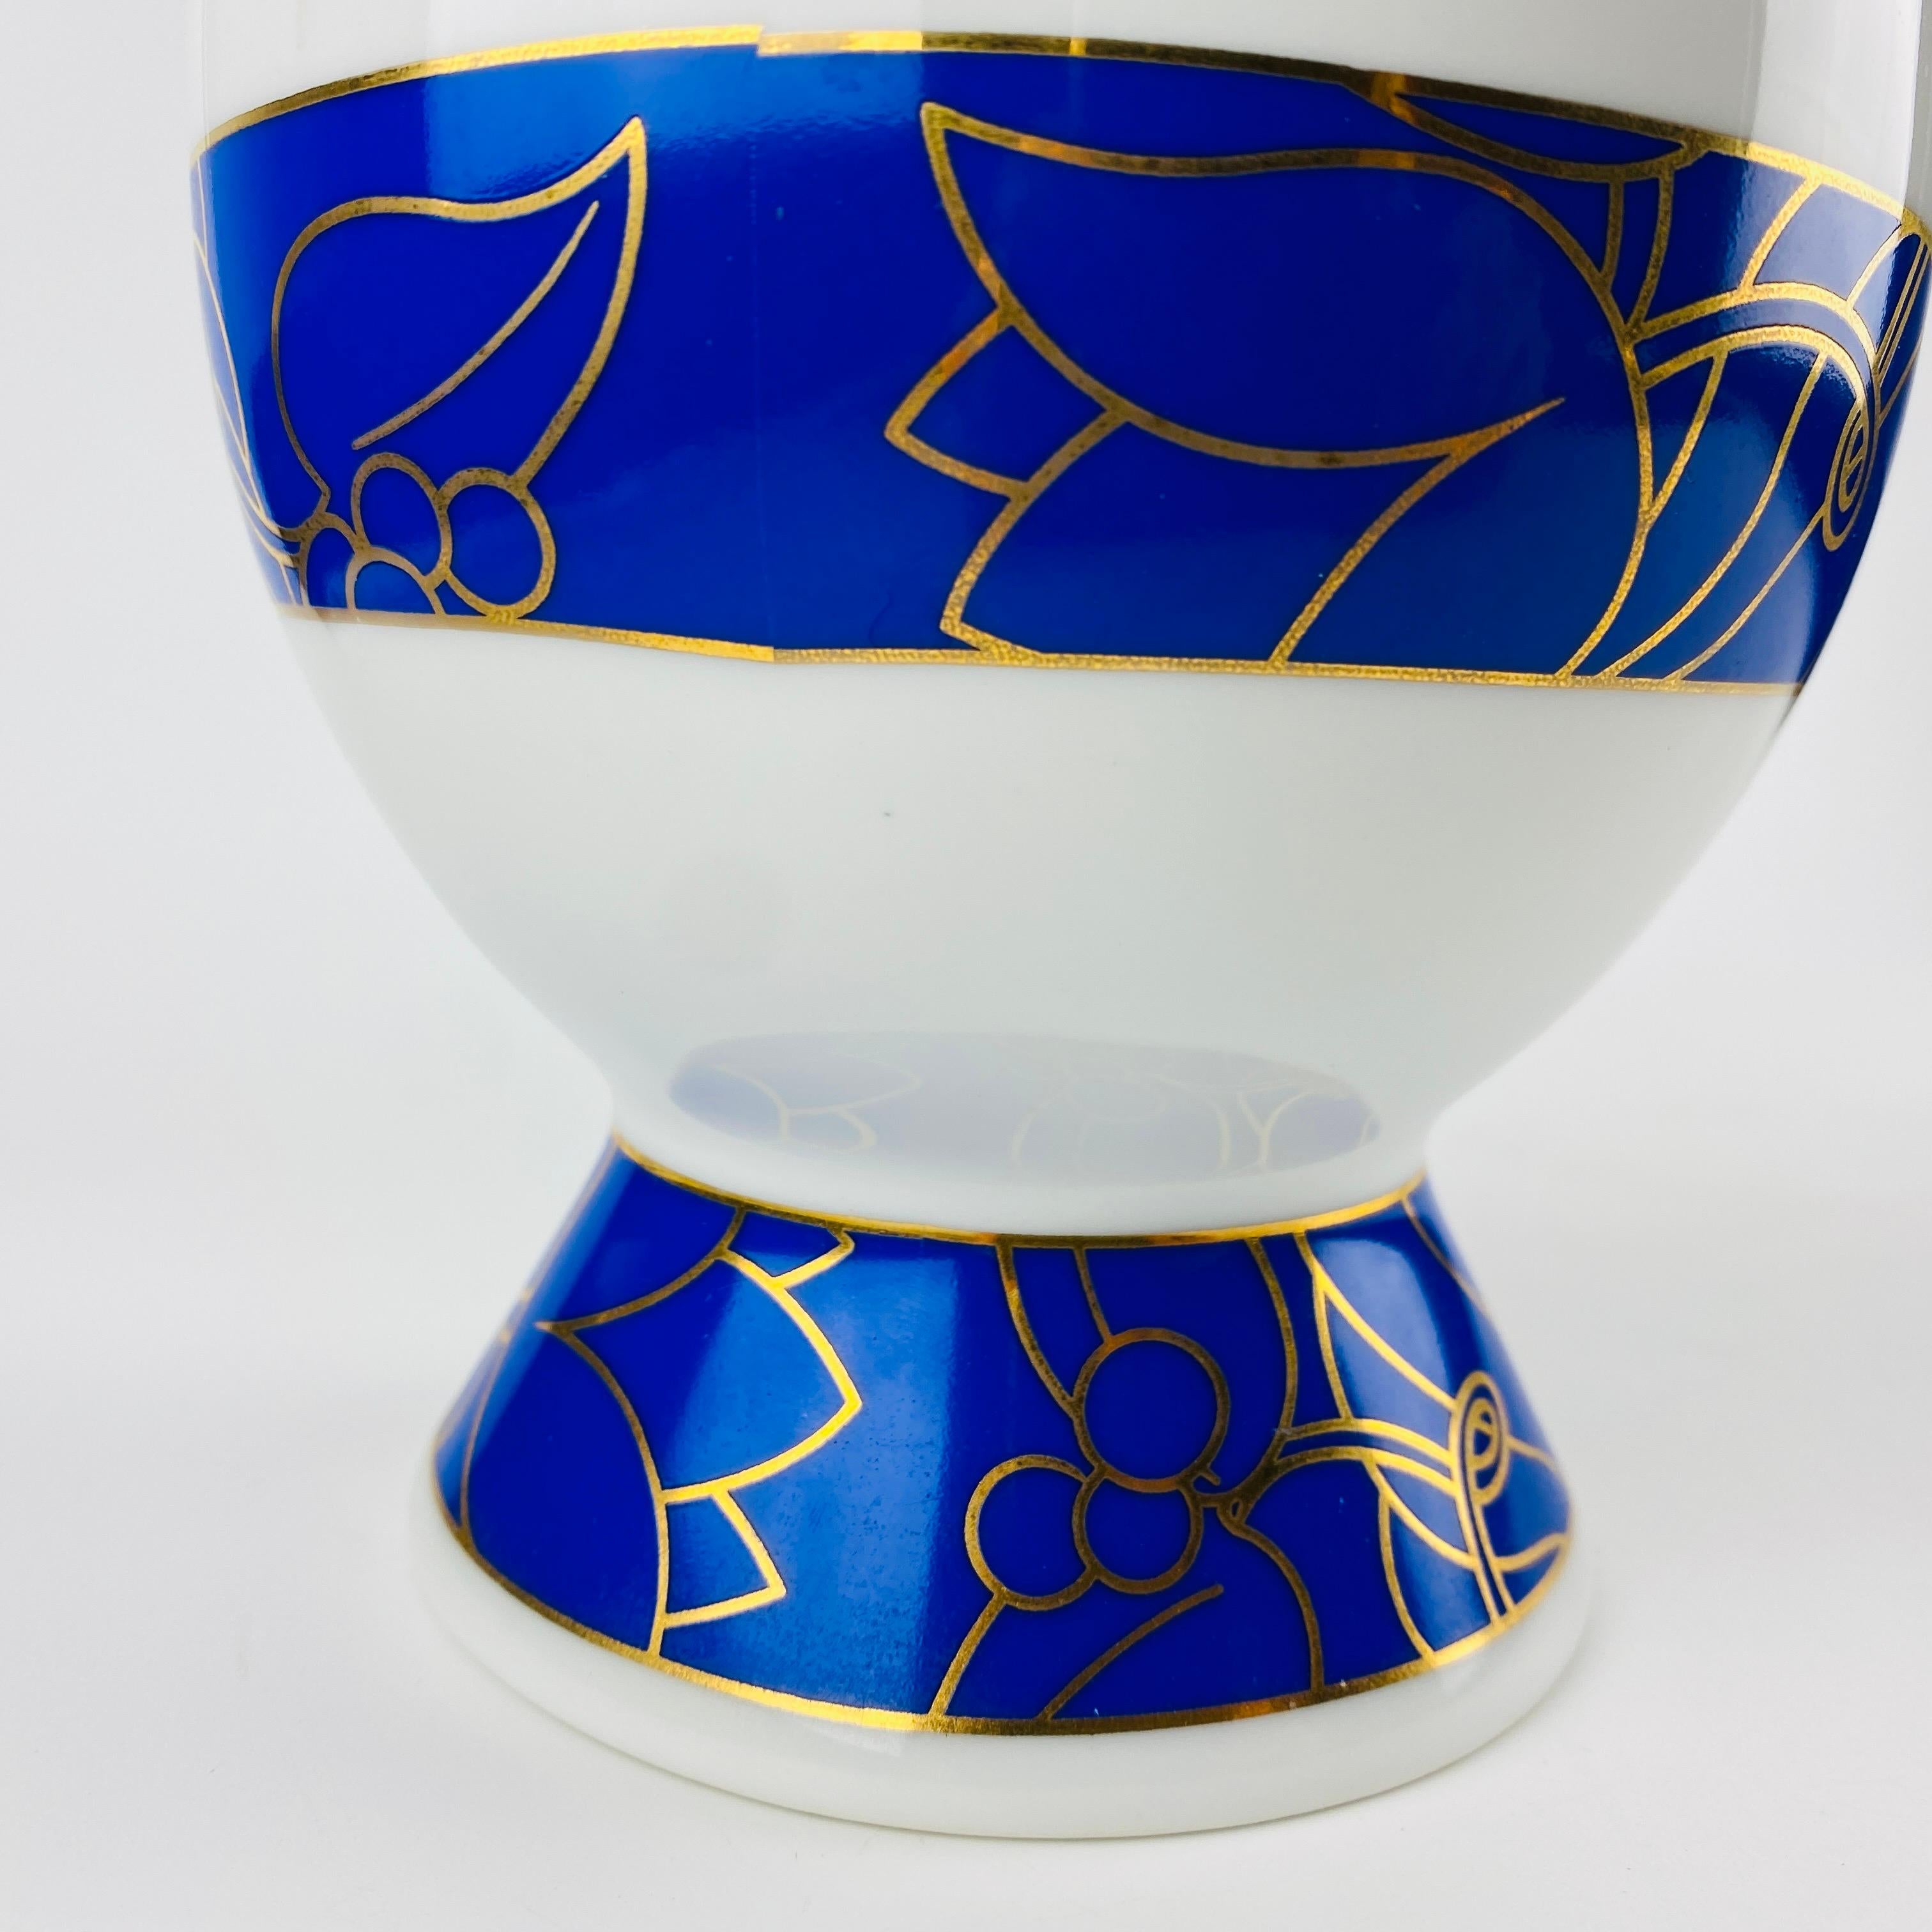 Alessi Tendentse Vase by Michael Graves for Alessandro Mendini 100% Make-up N32 6